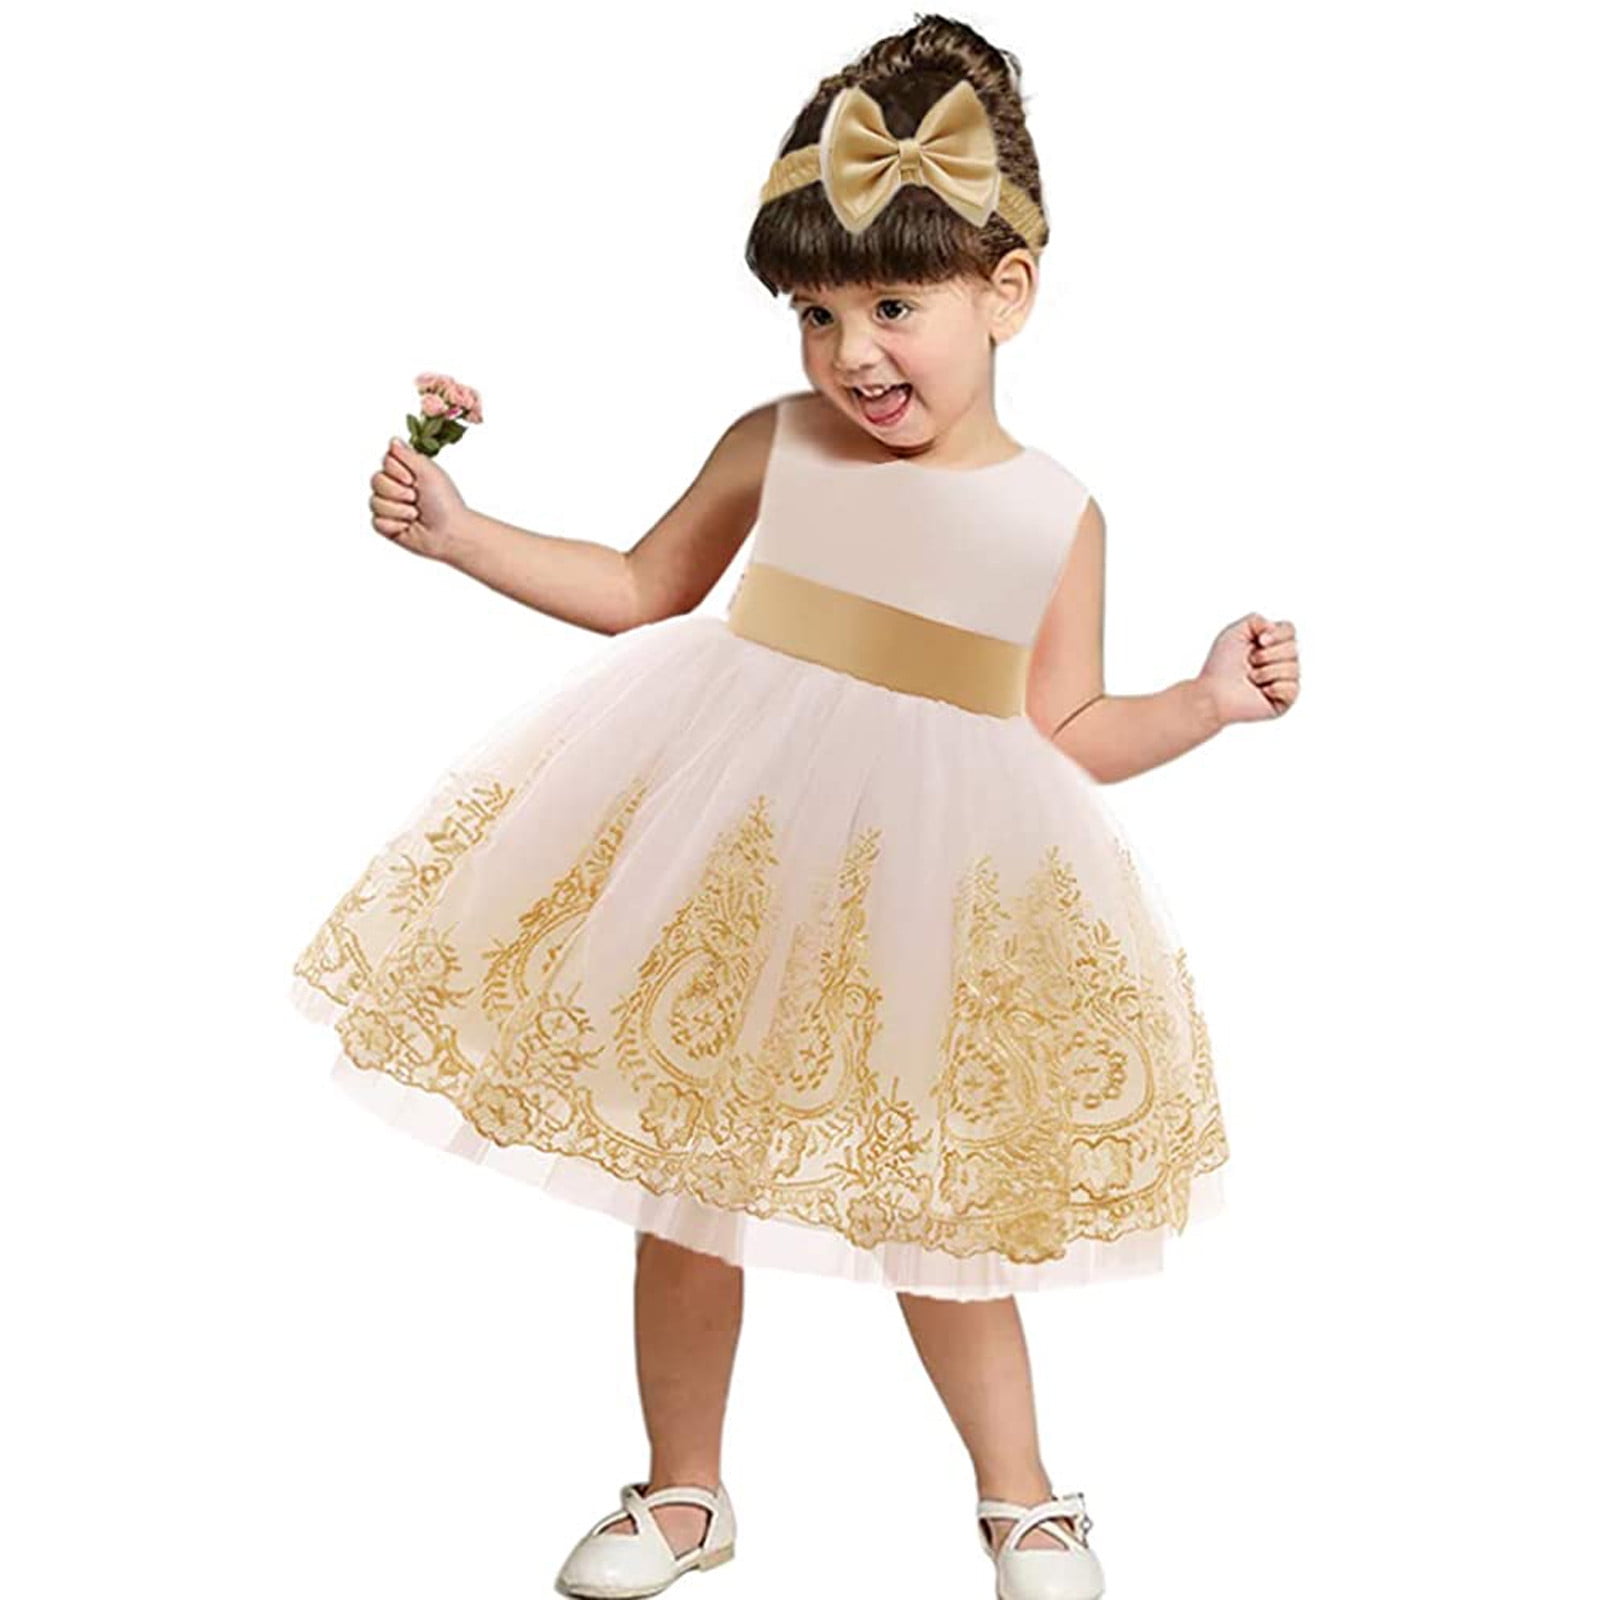 6M-8T Merry Day Vintage Toddler Dresses Halter Girls Dress with Tulle Lace for Party Casual Sundress 